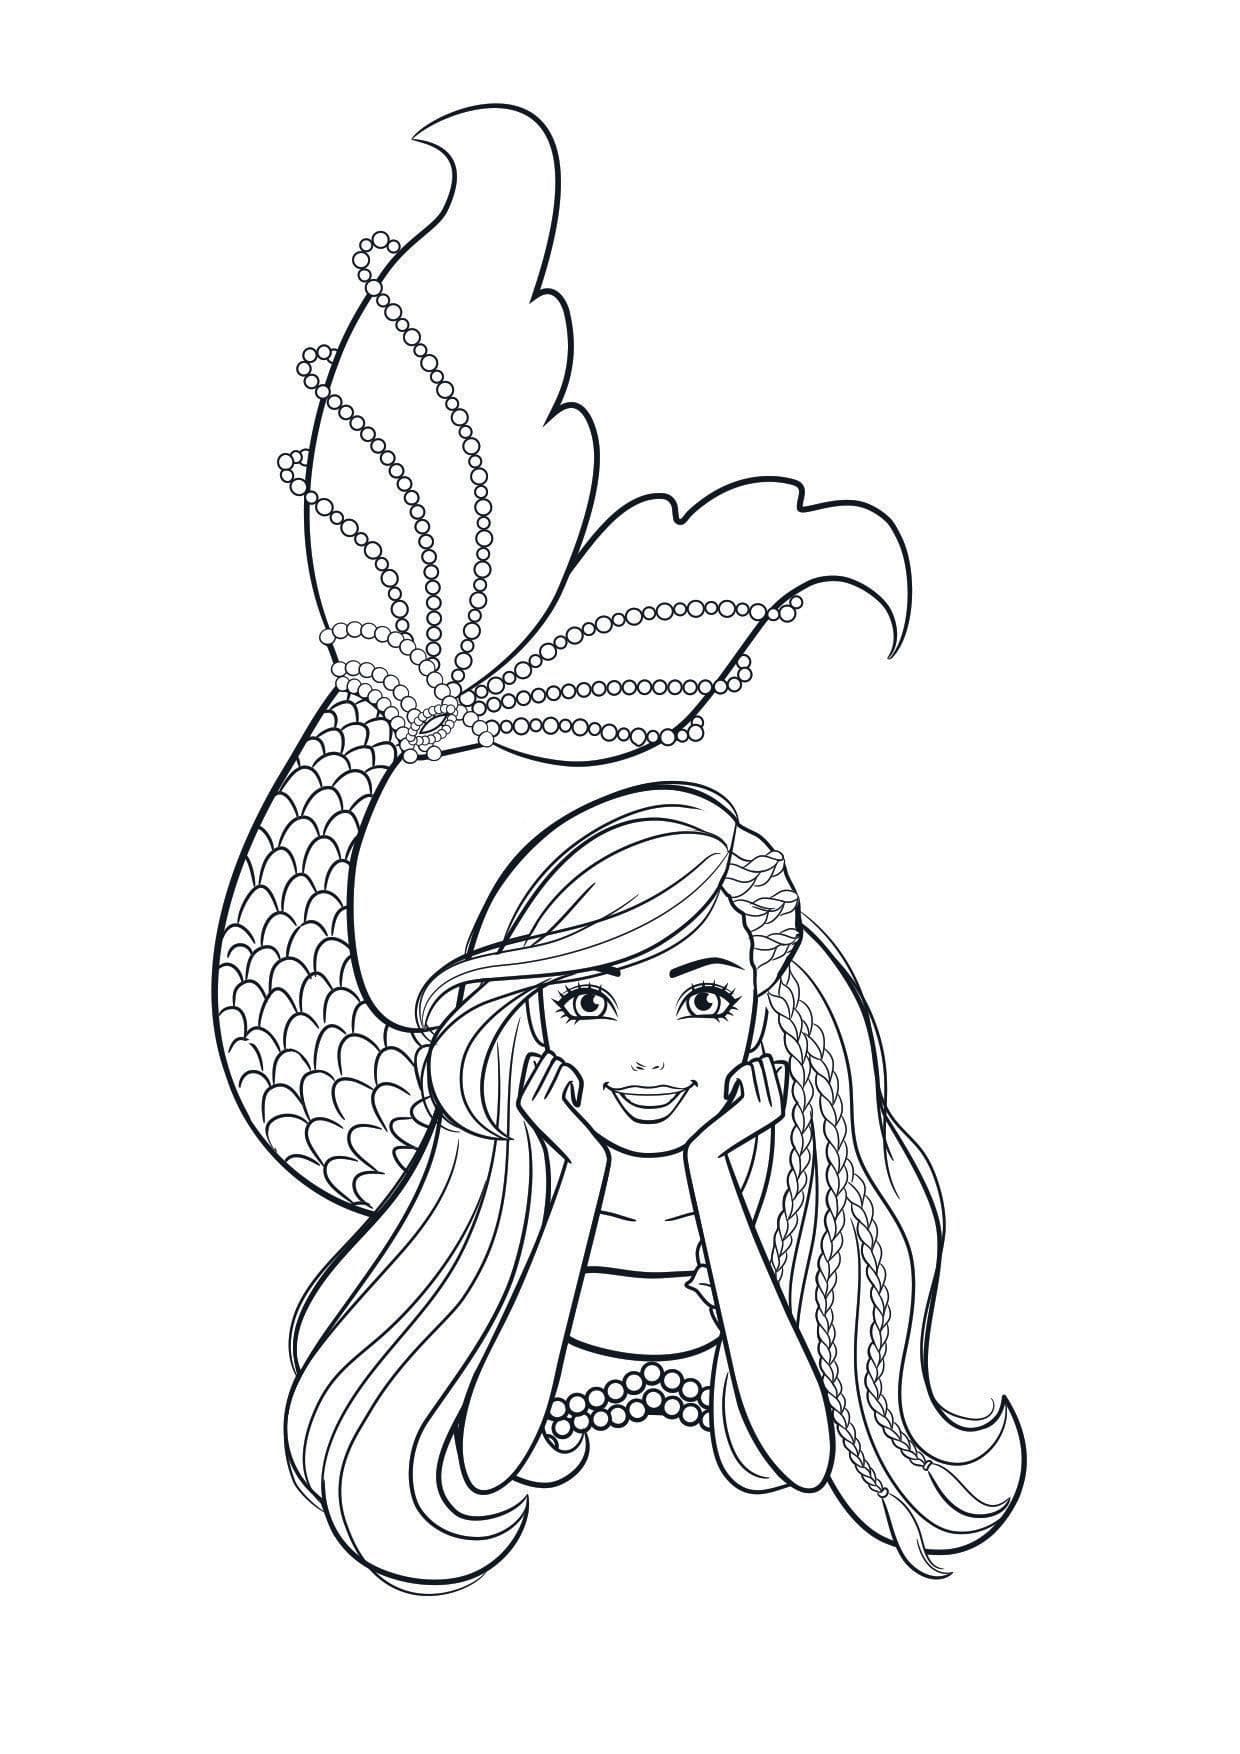 Top 20 Printable Barie Coloring Pages - Online Coloring Pages